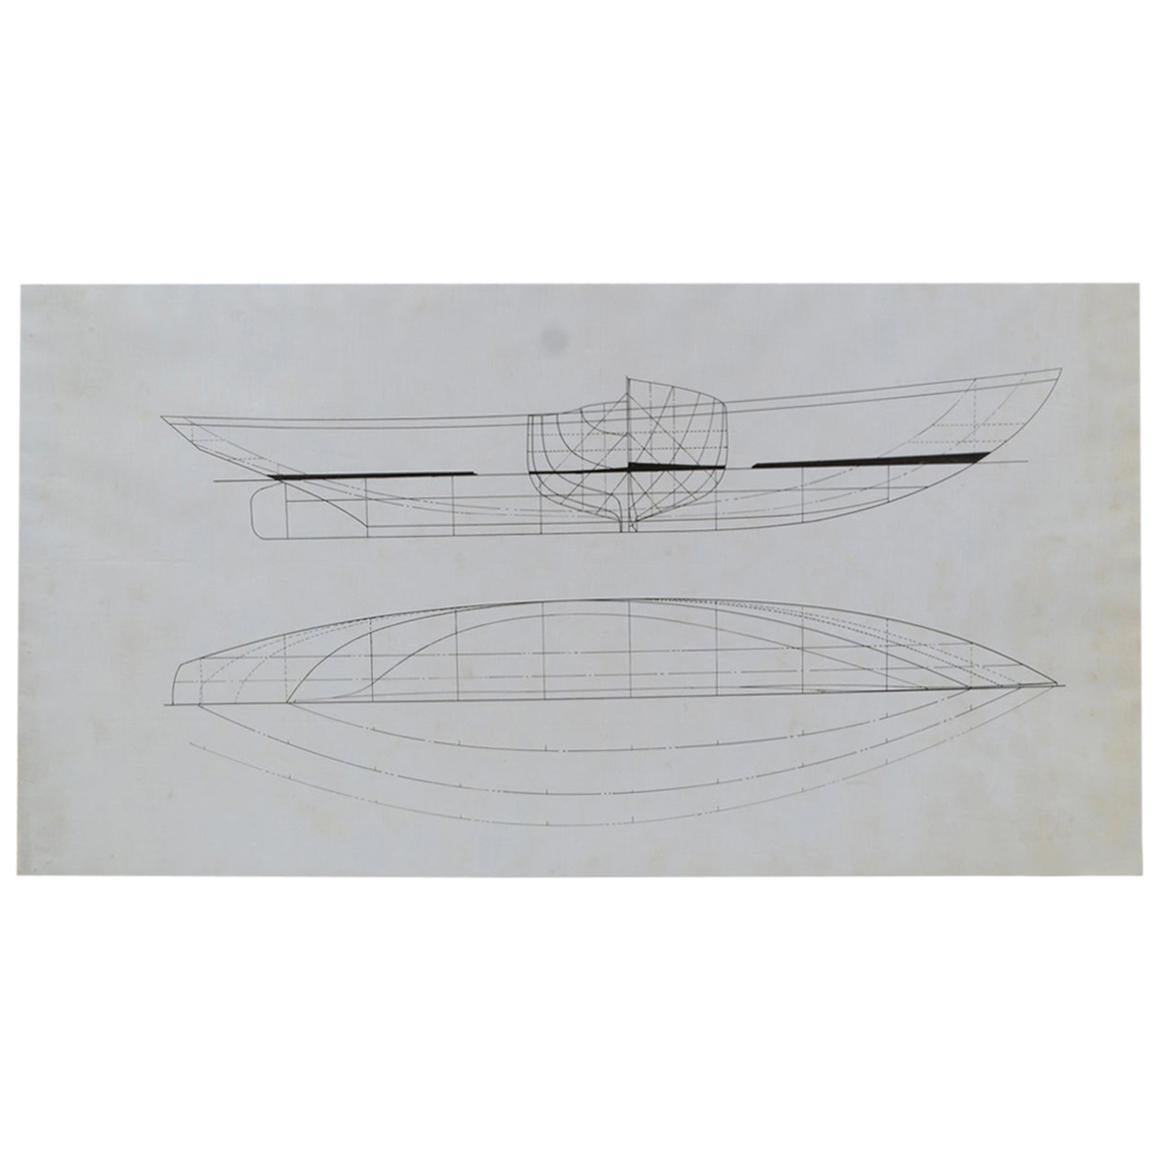 1920s Antique Nautical Anonymous Boat Project from the Uffa Fox Archives